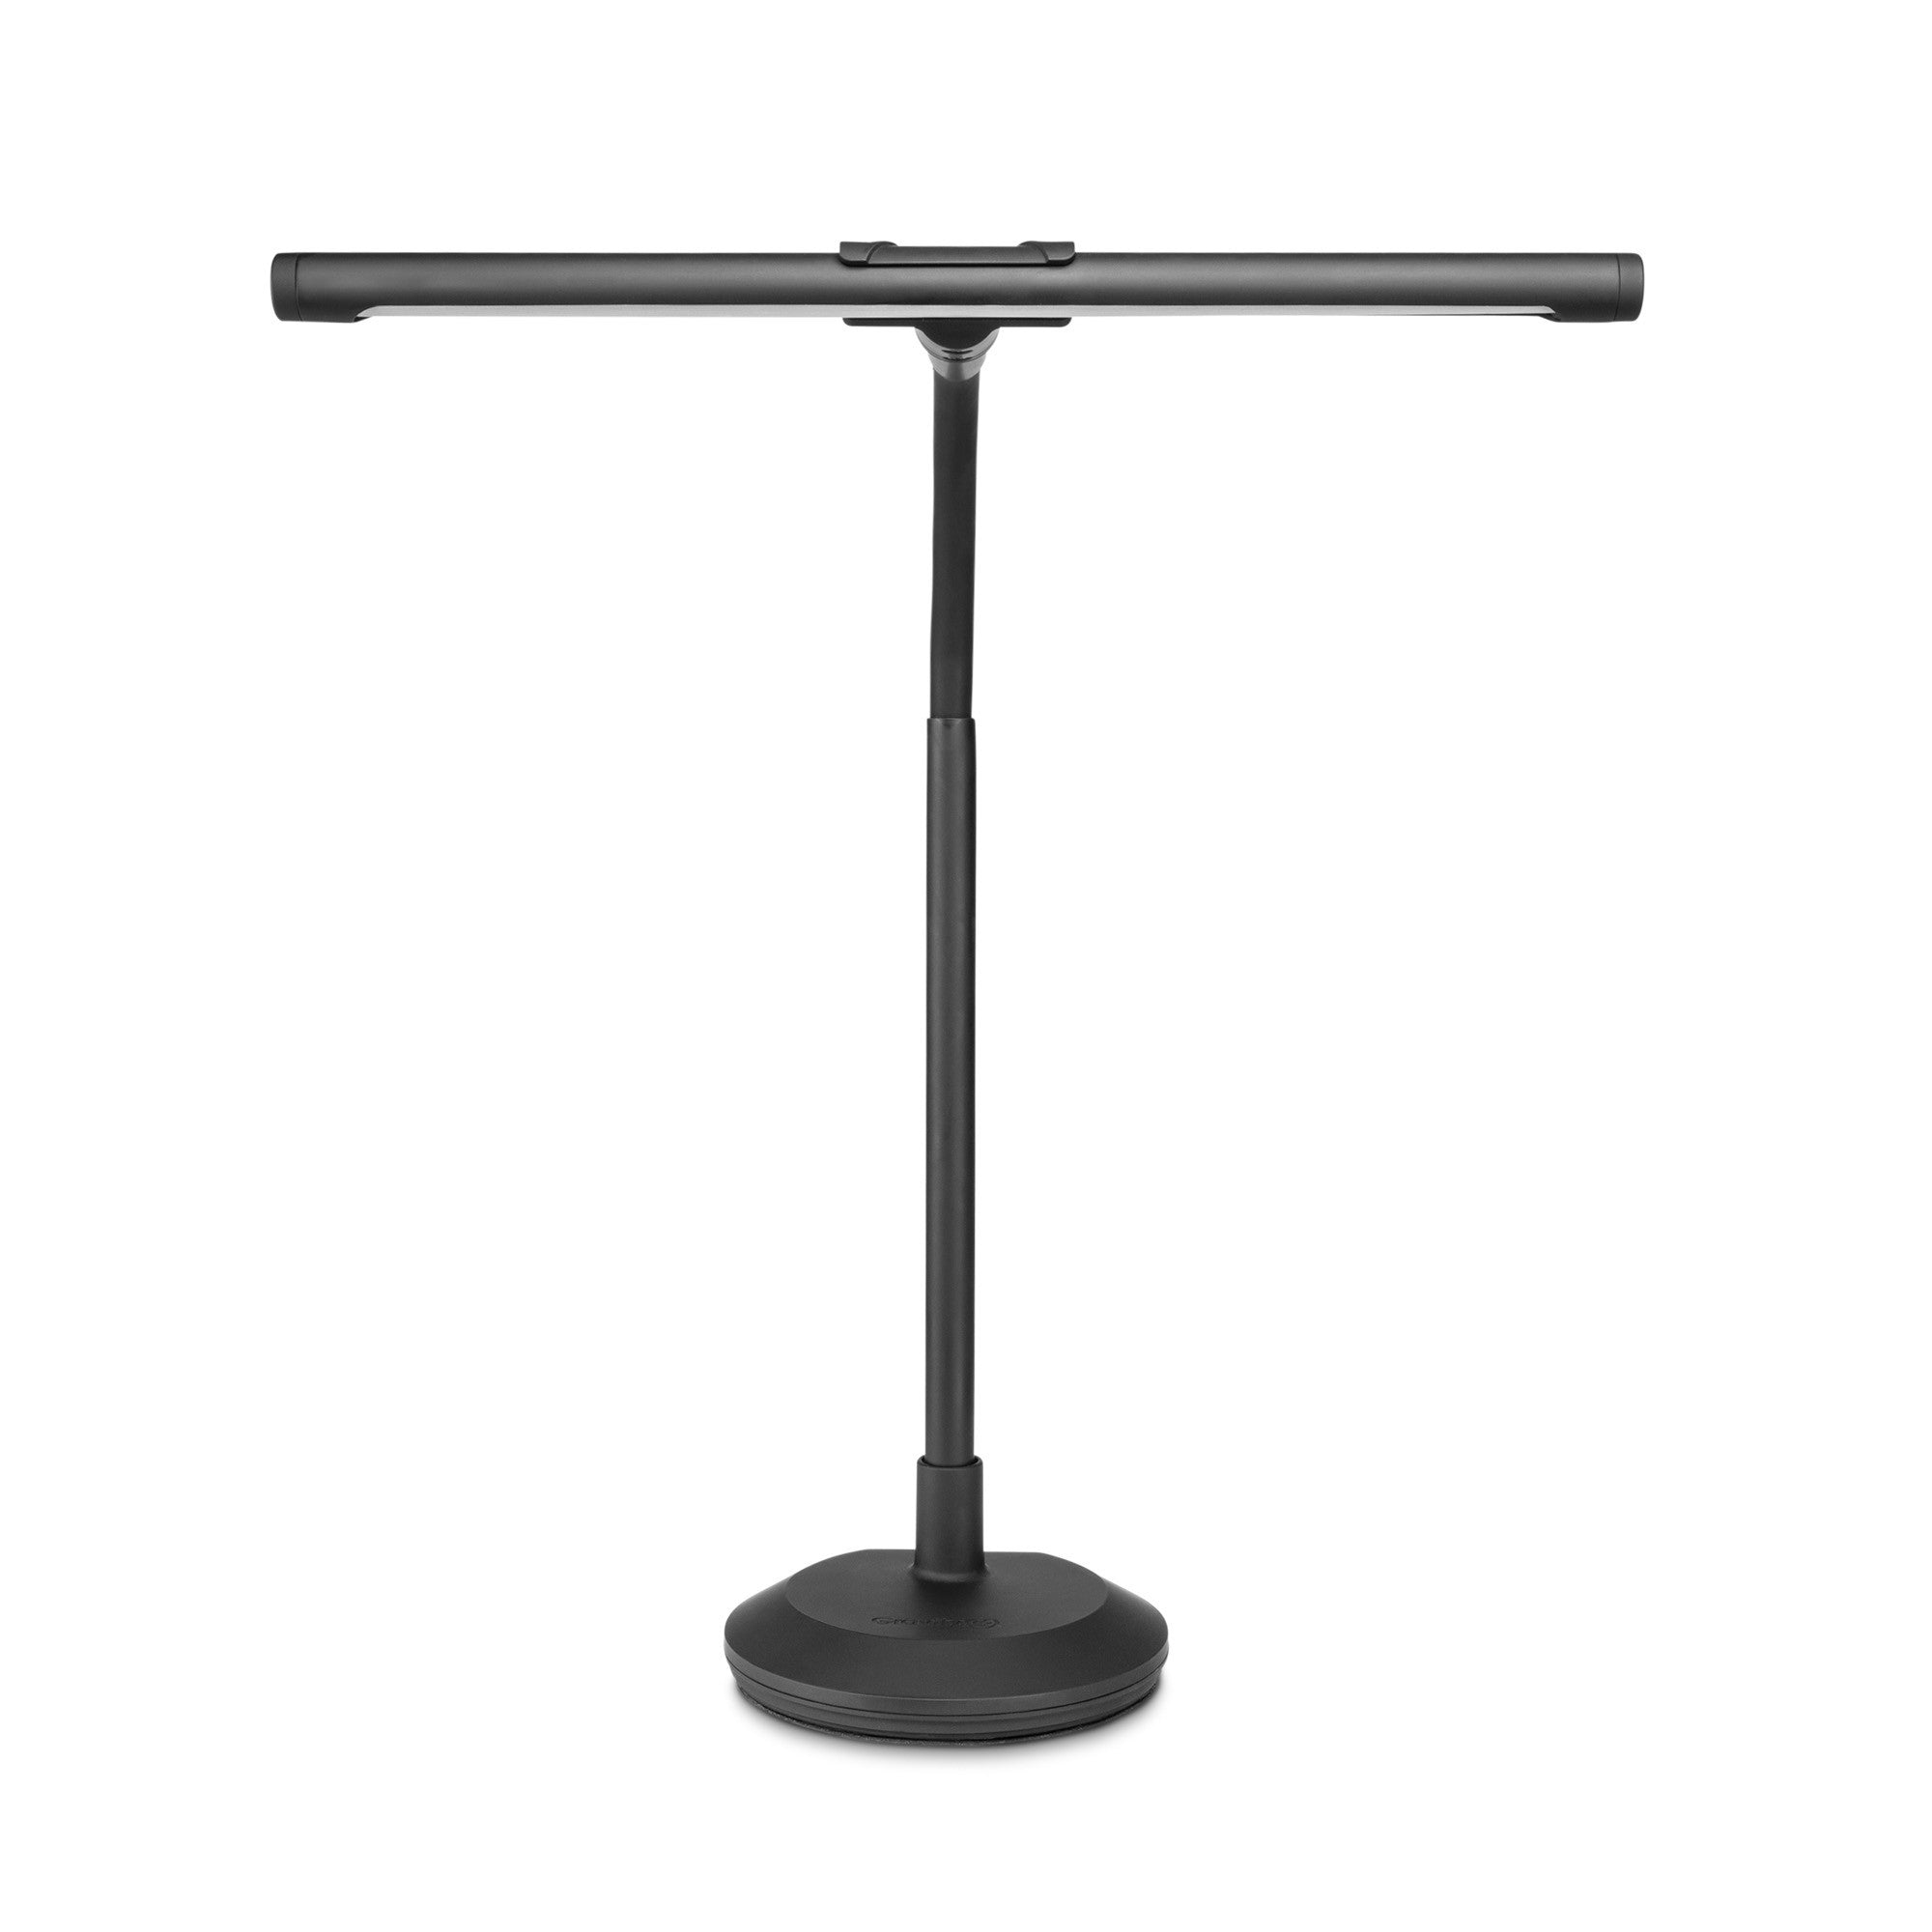 Gravity LEDPLT2B Dimmable LED Desk And Piano Lamp With USB Charging Port (TBar)